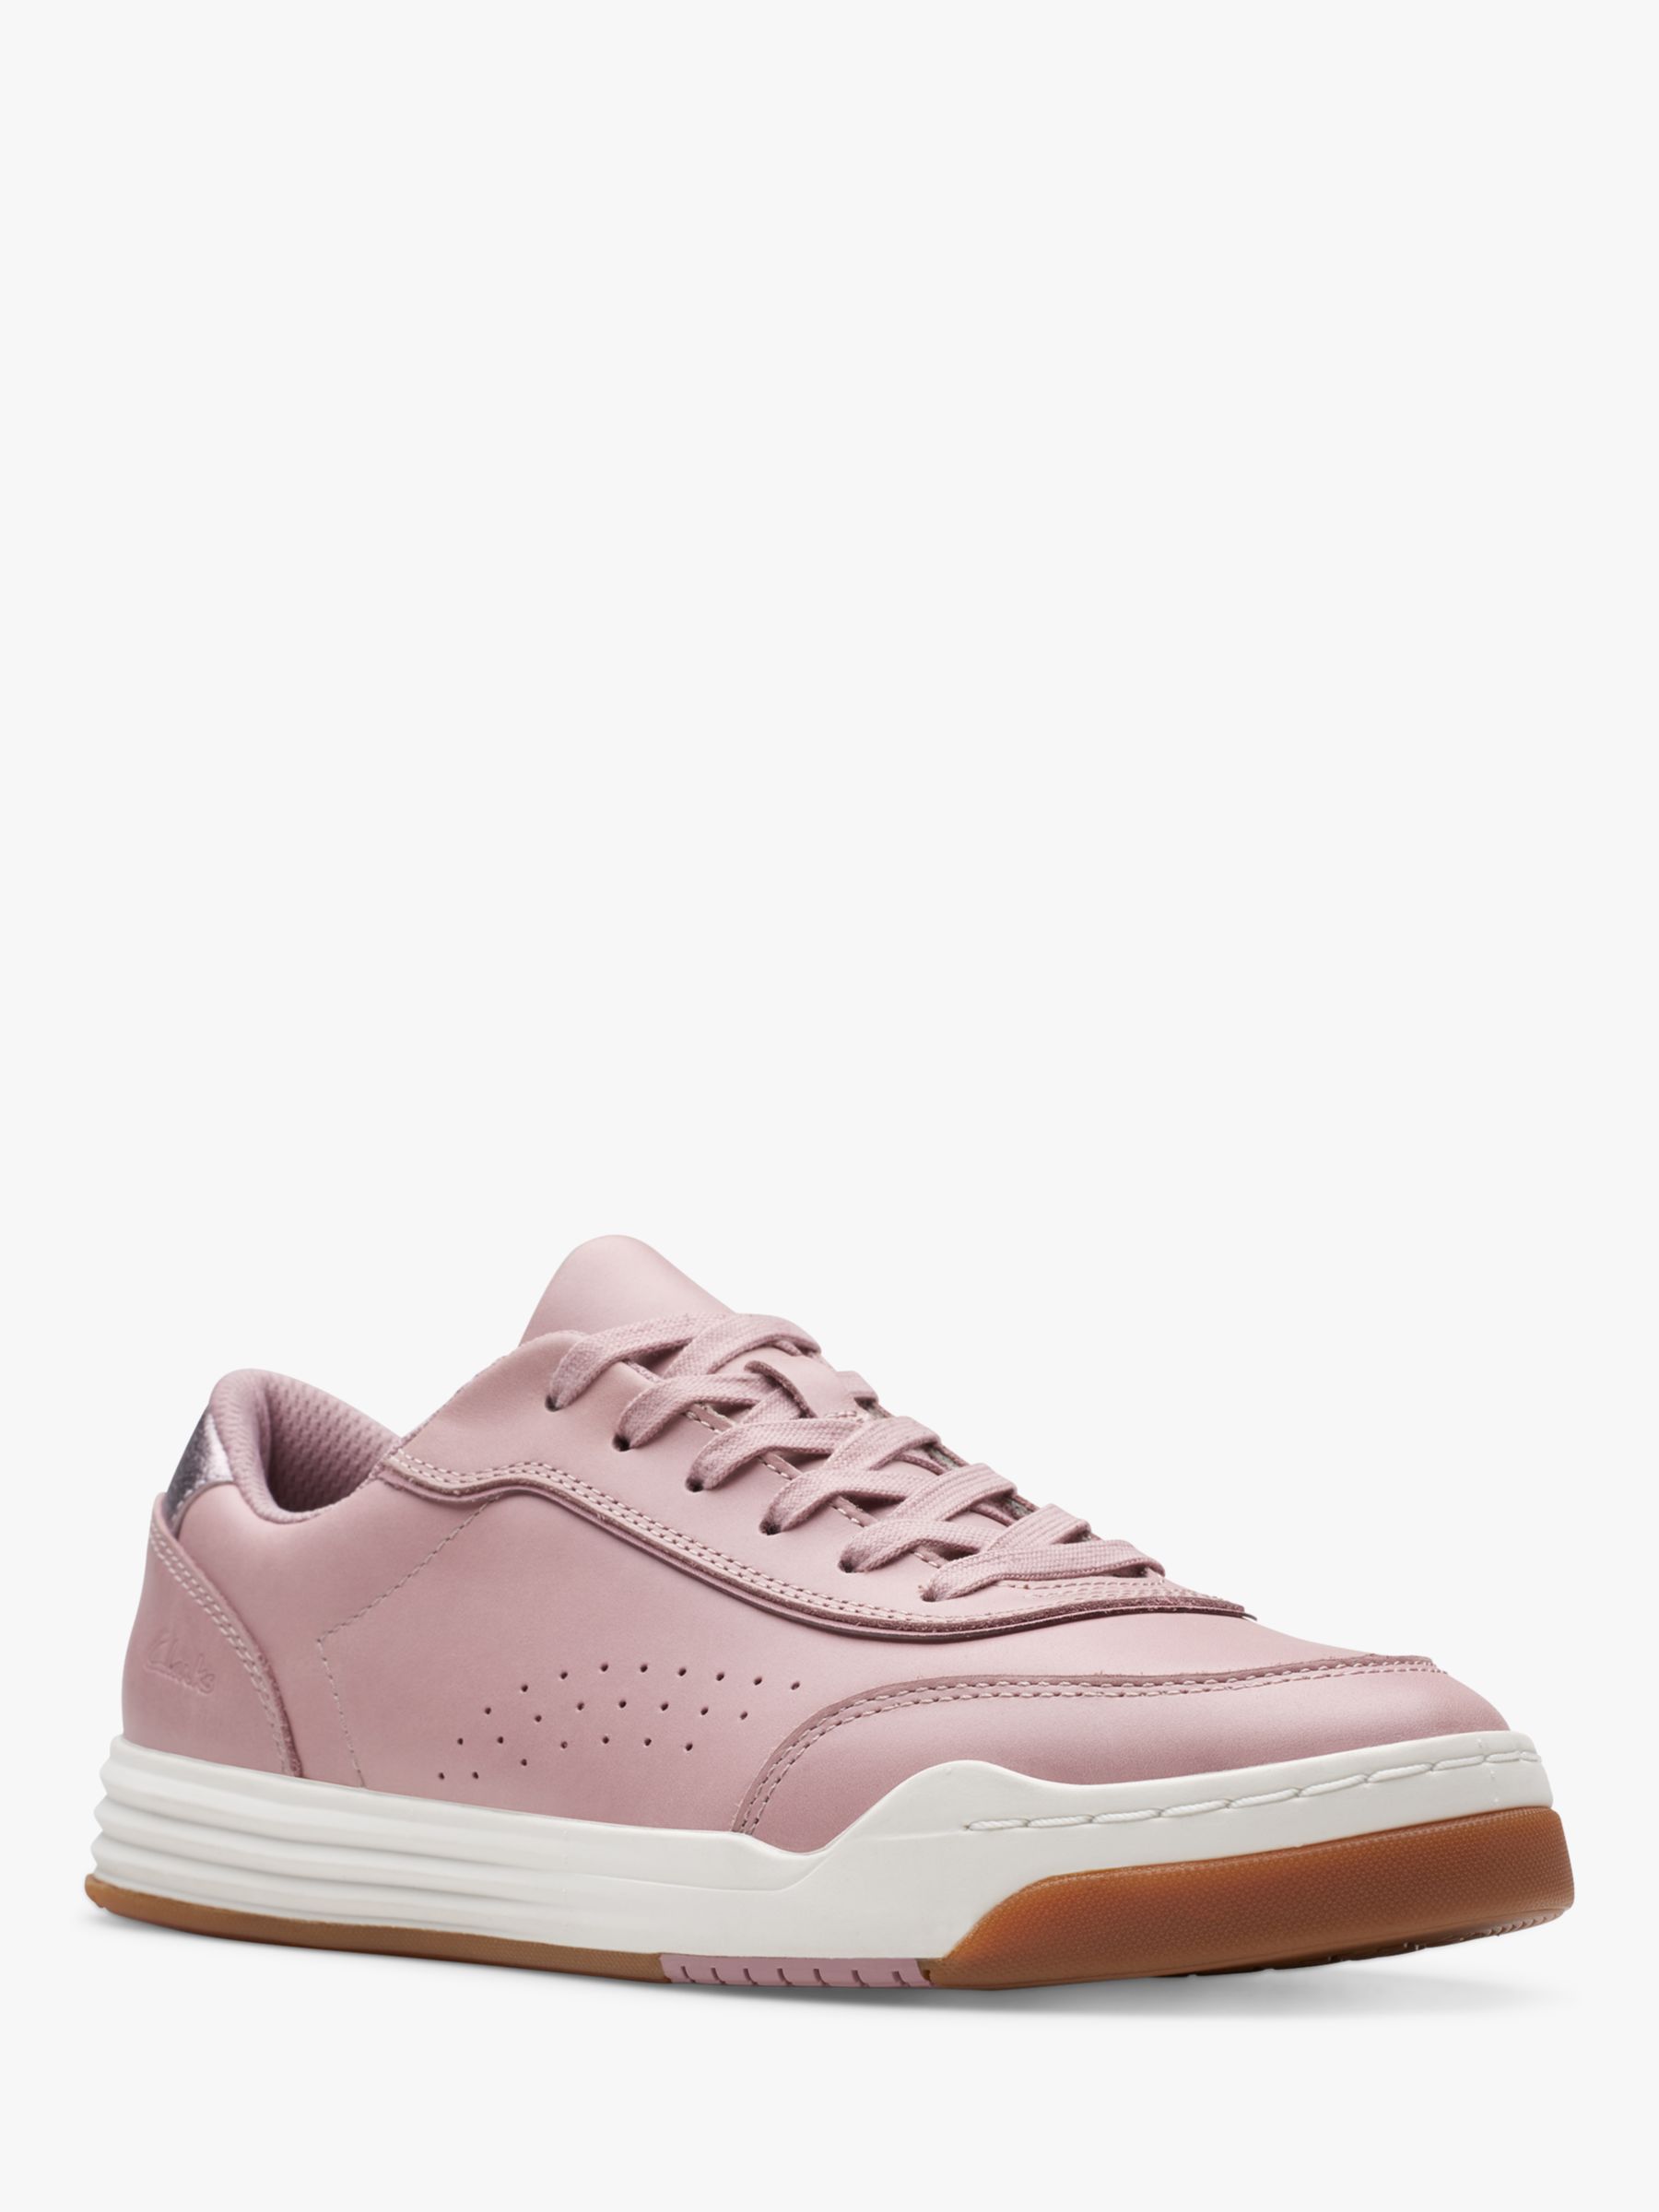 Clarks Kids' Urban Solo Leather Lace Up Trainers, Dusty Pink, 1